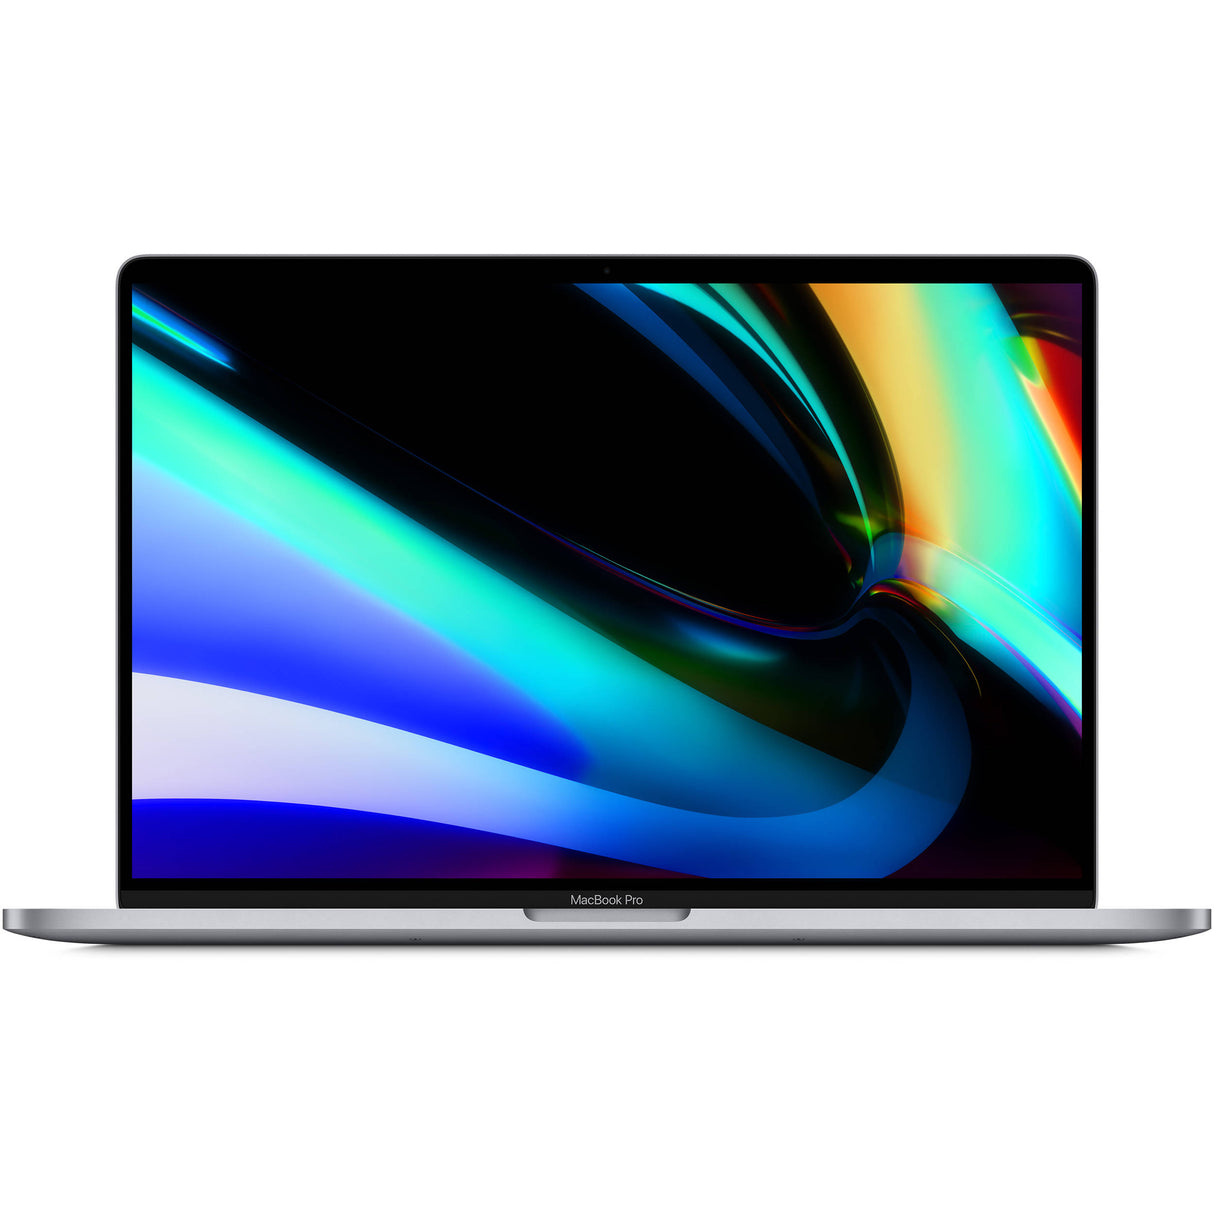 Apple MacBook Pro 16-inch i7 with Touch Bar A2141 2019 model (Refurbished)